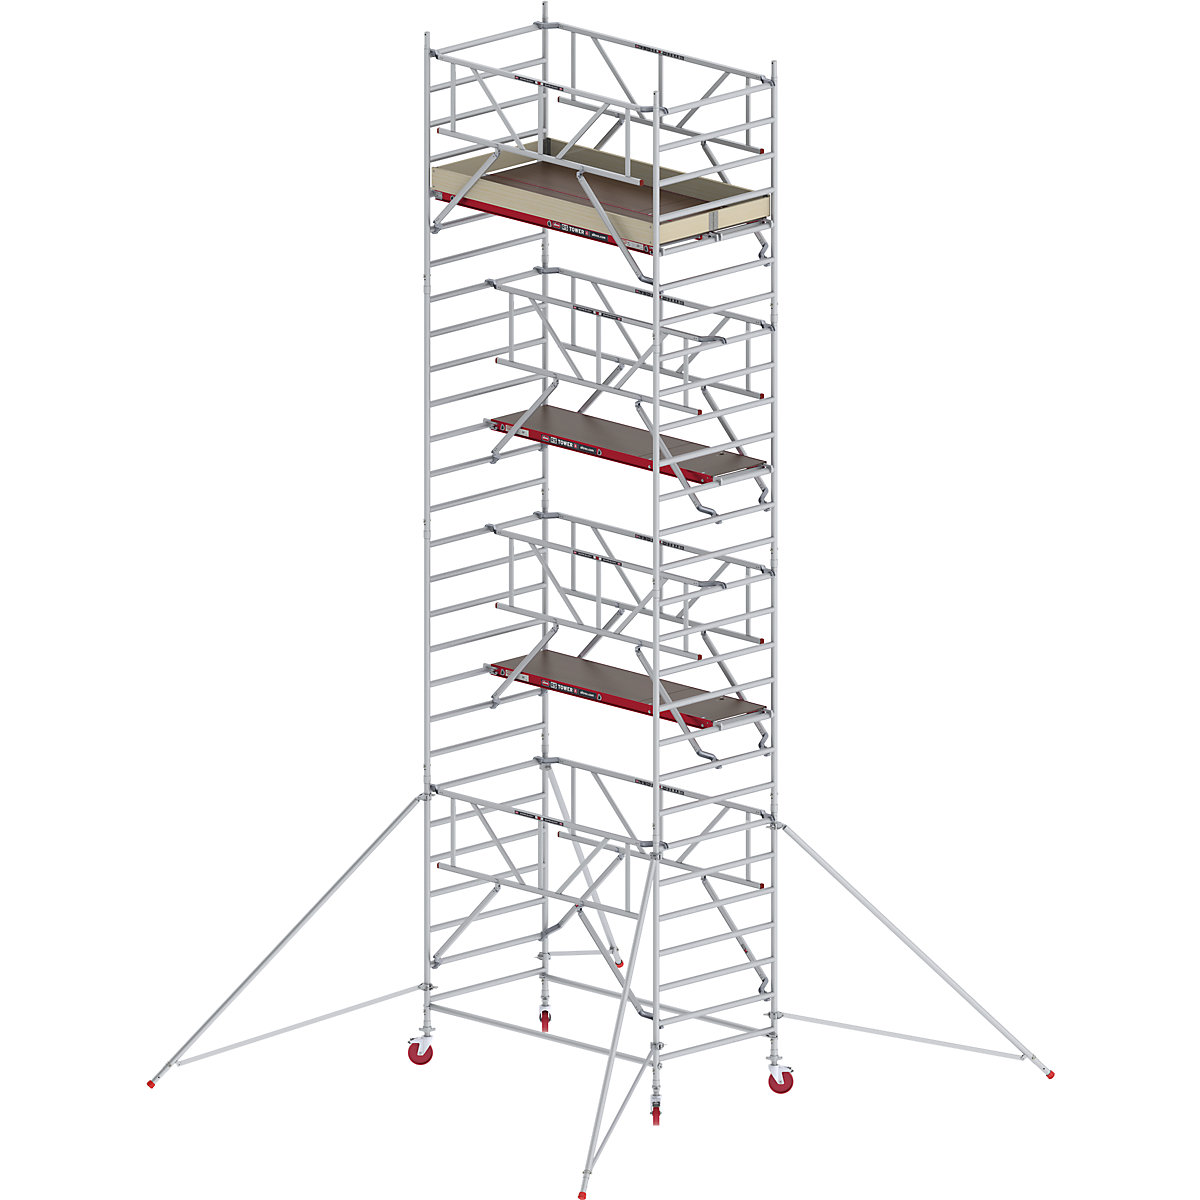 RS TOWER 42 wide mobile access tower with Safe-Quick® – Altrex, wooden platform, length 2.45 m, working height 9.20 m-6